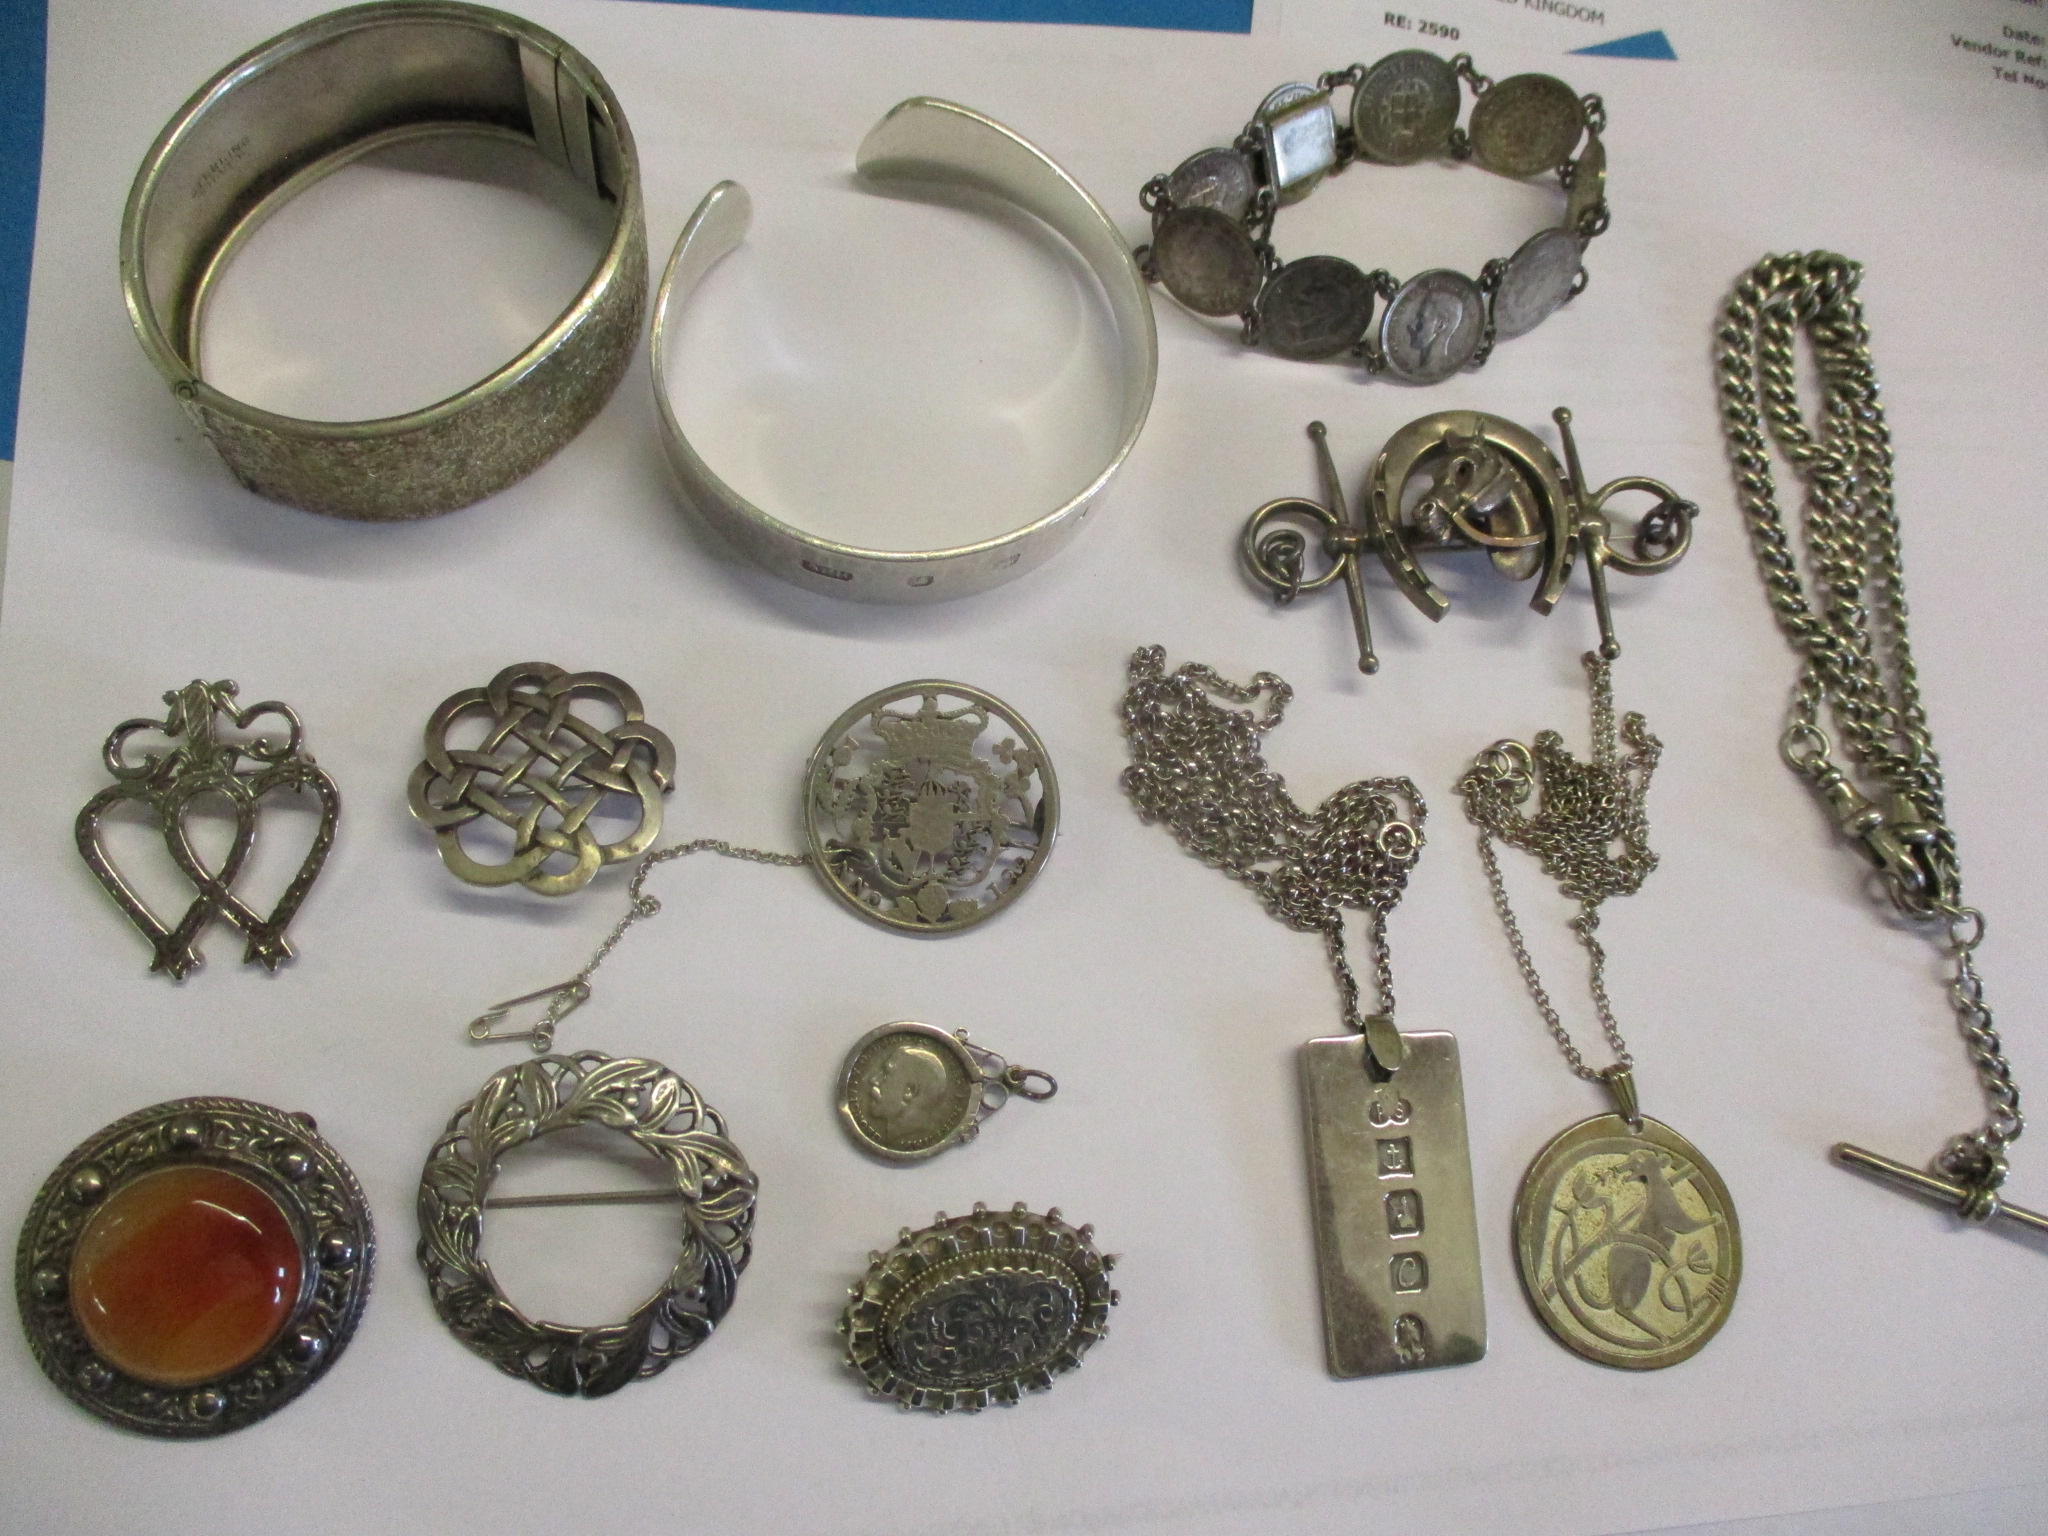 A silver fob watch chain, a silver ingot pendant on a white metal chain, two silver bangles and